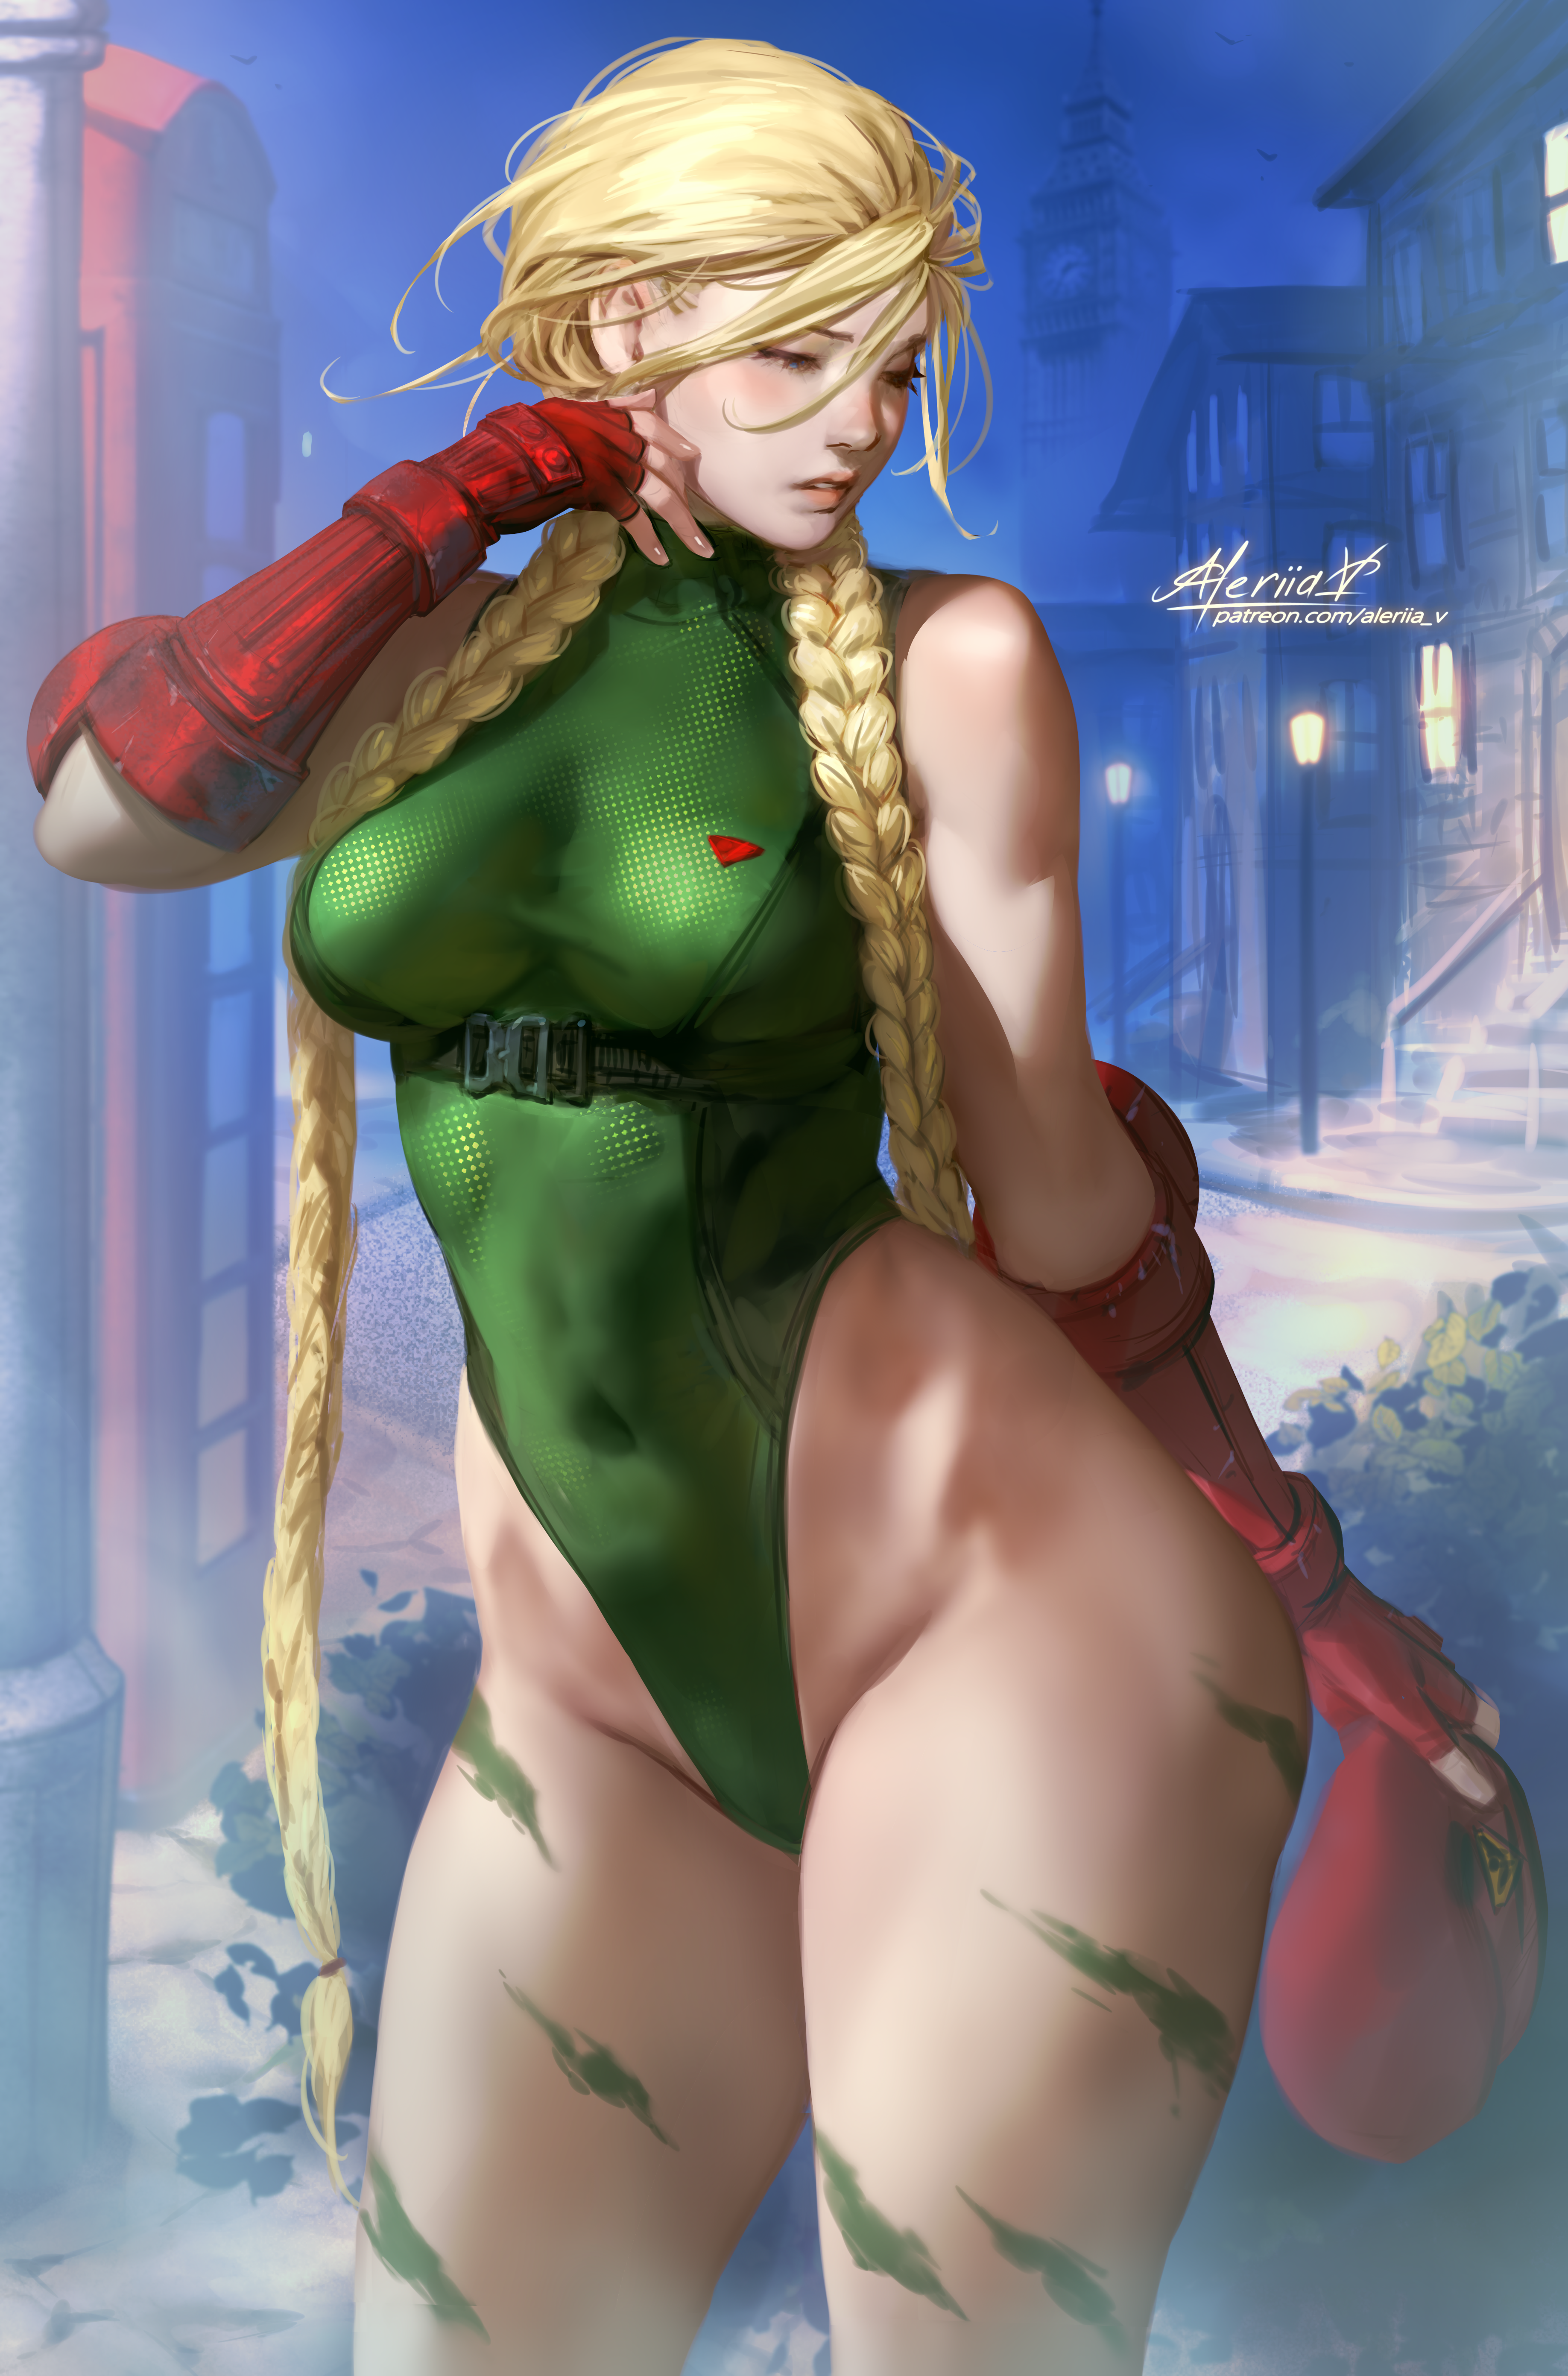 General 3672x5564 Cammy White Street Fighter video games Fighting Games braids blonde long hair artwork drawing fan art Lera Pi video game girls standing signature watermarked portrait display gloves looking away parted lips street light building video game characters hat twintails phone box